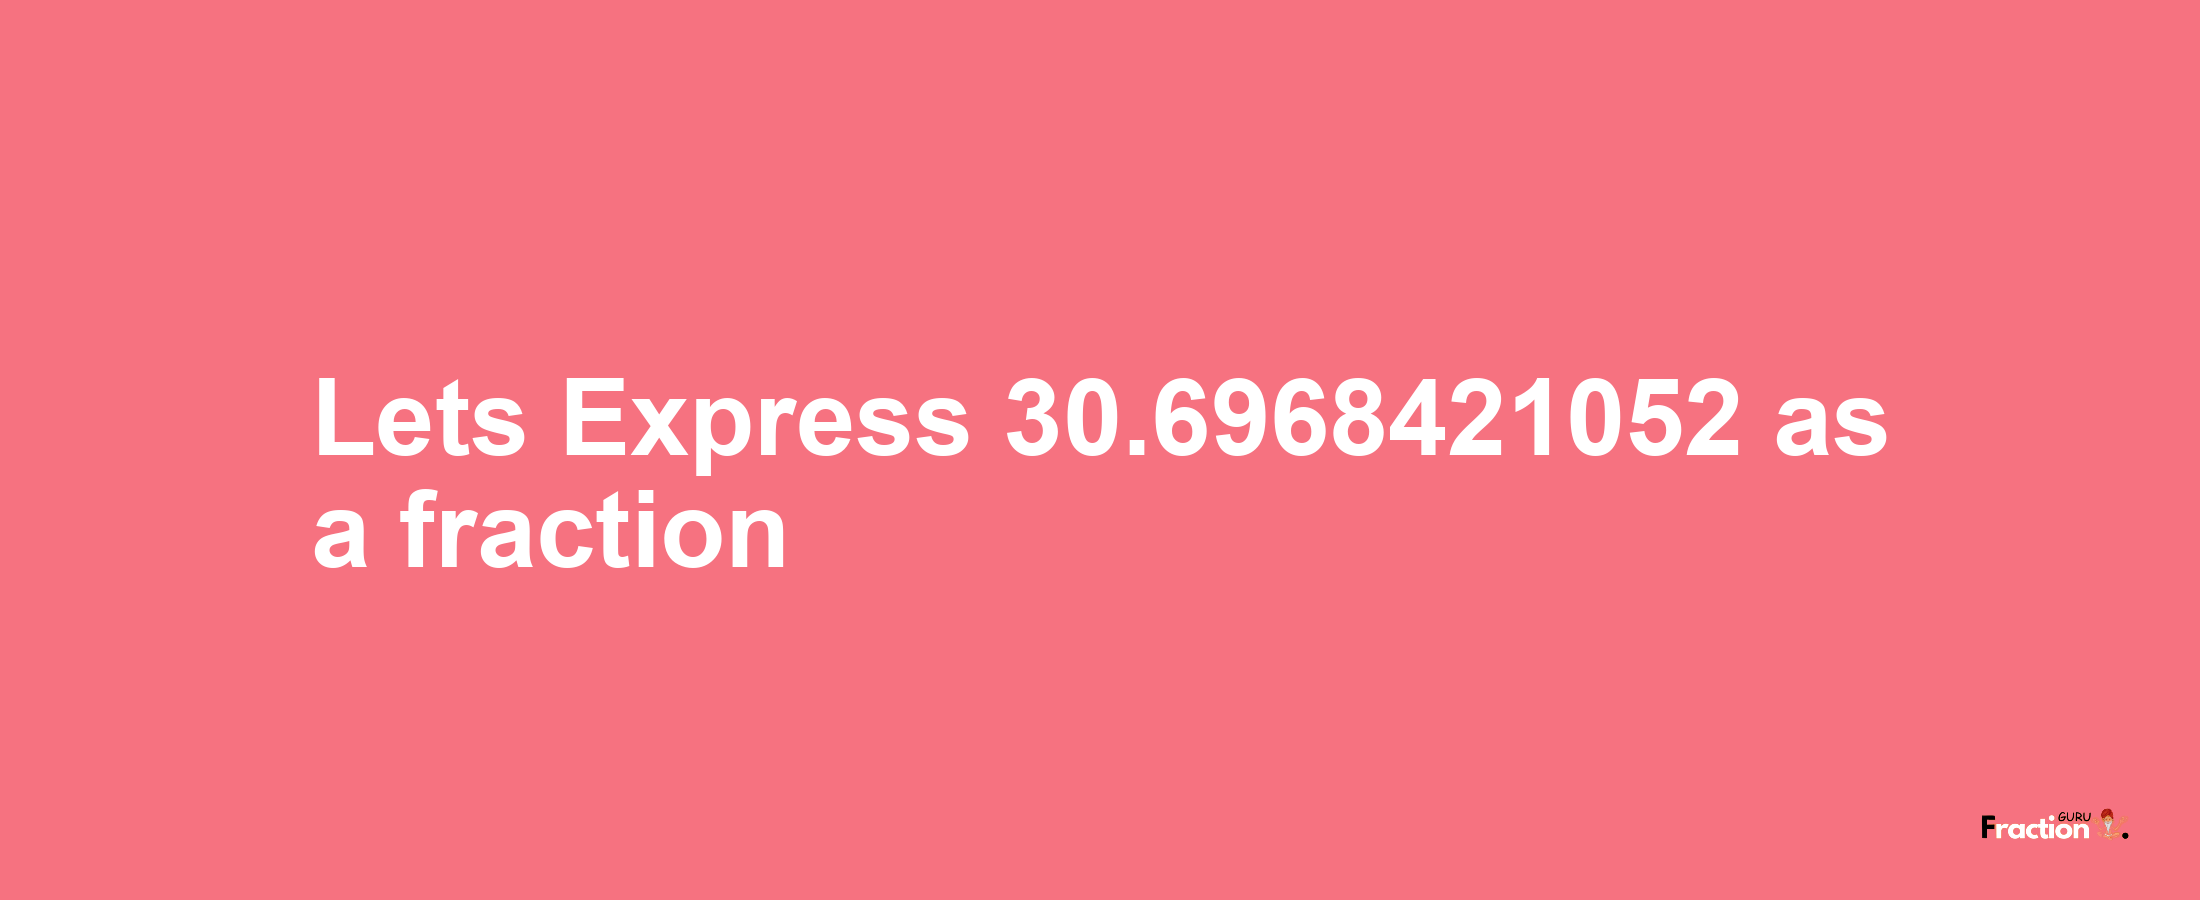 Lets Express 30.6968421052 as afraction